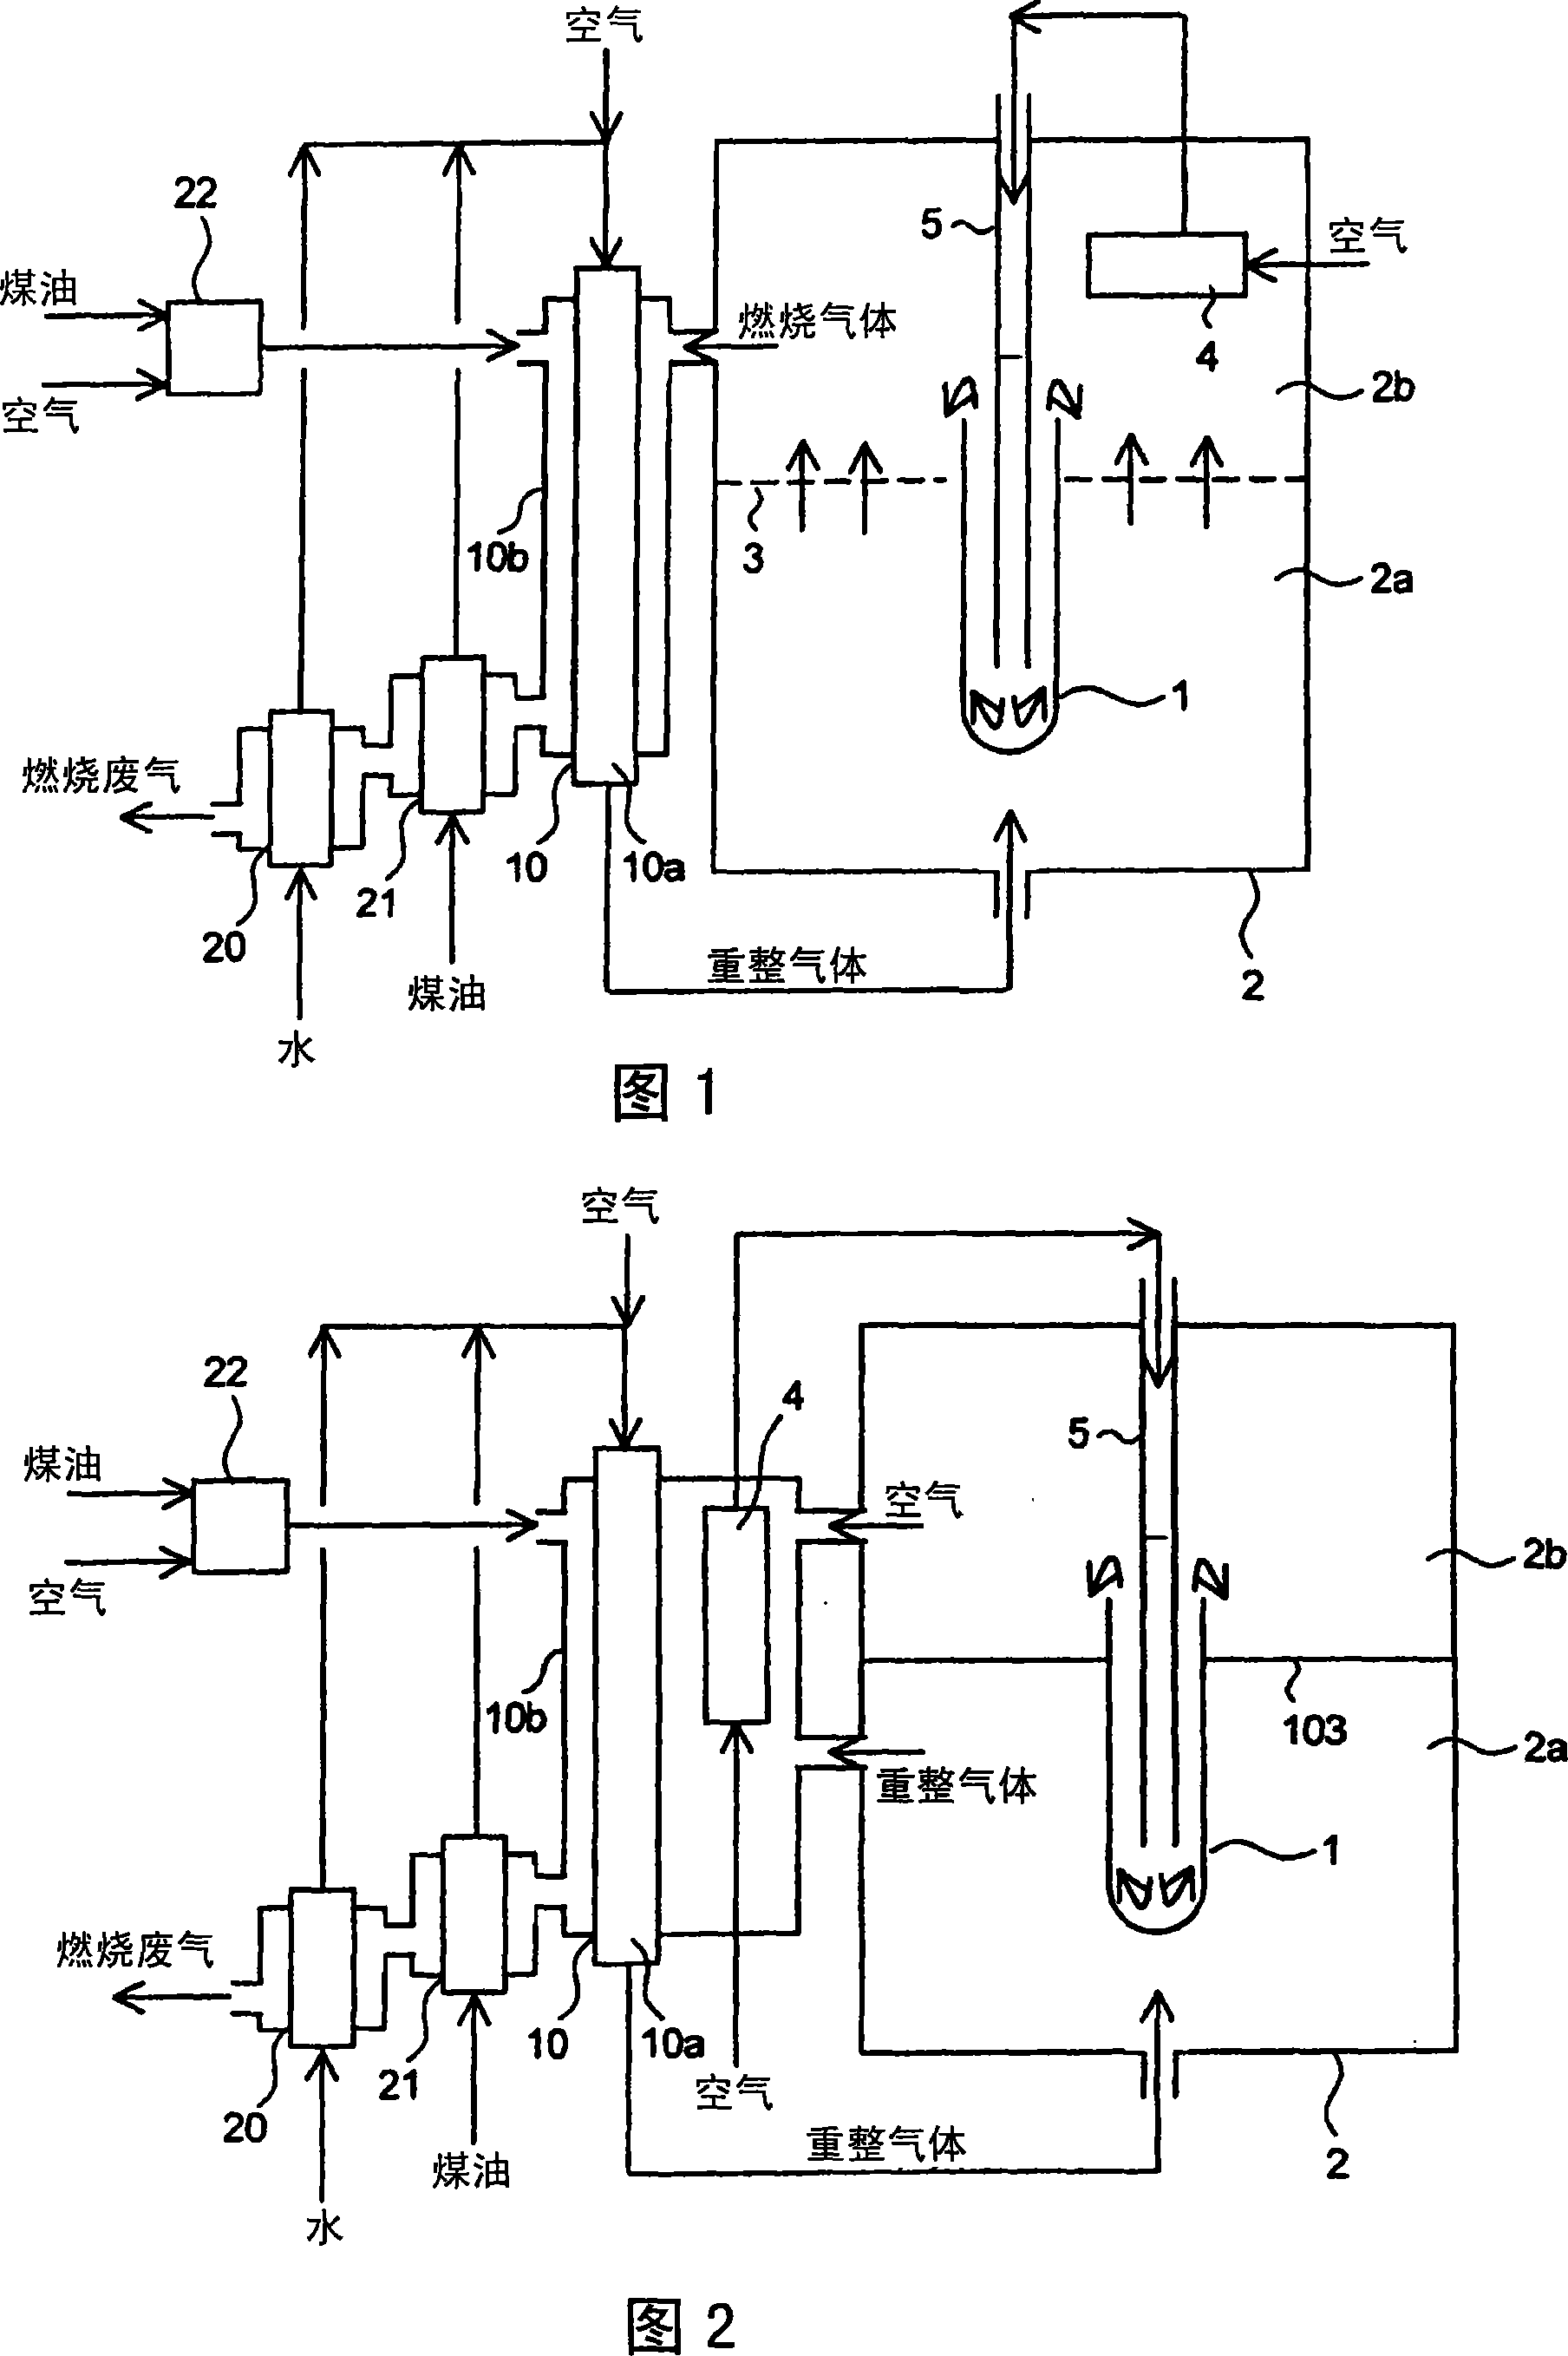 Method of starting solid oxide fuel cell system